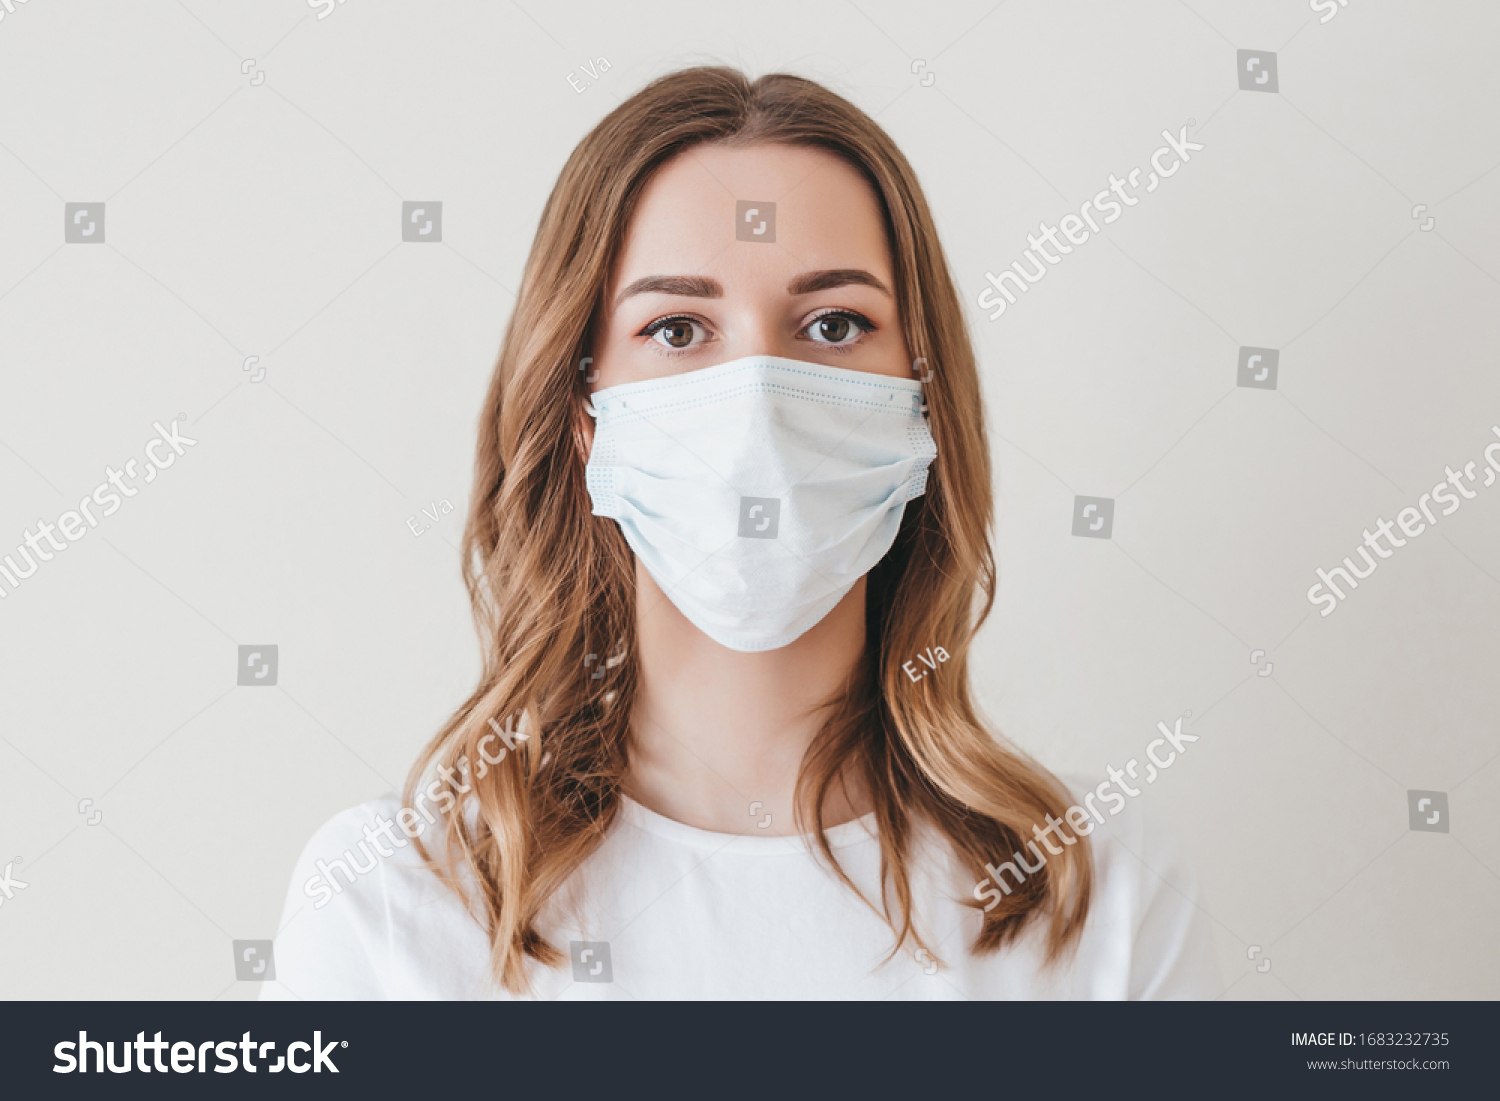 Portrait of a young girl in a medical mask isolated on a white wall background. Young woman patient, copy space #1683232735